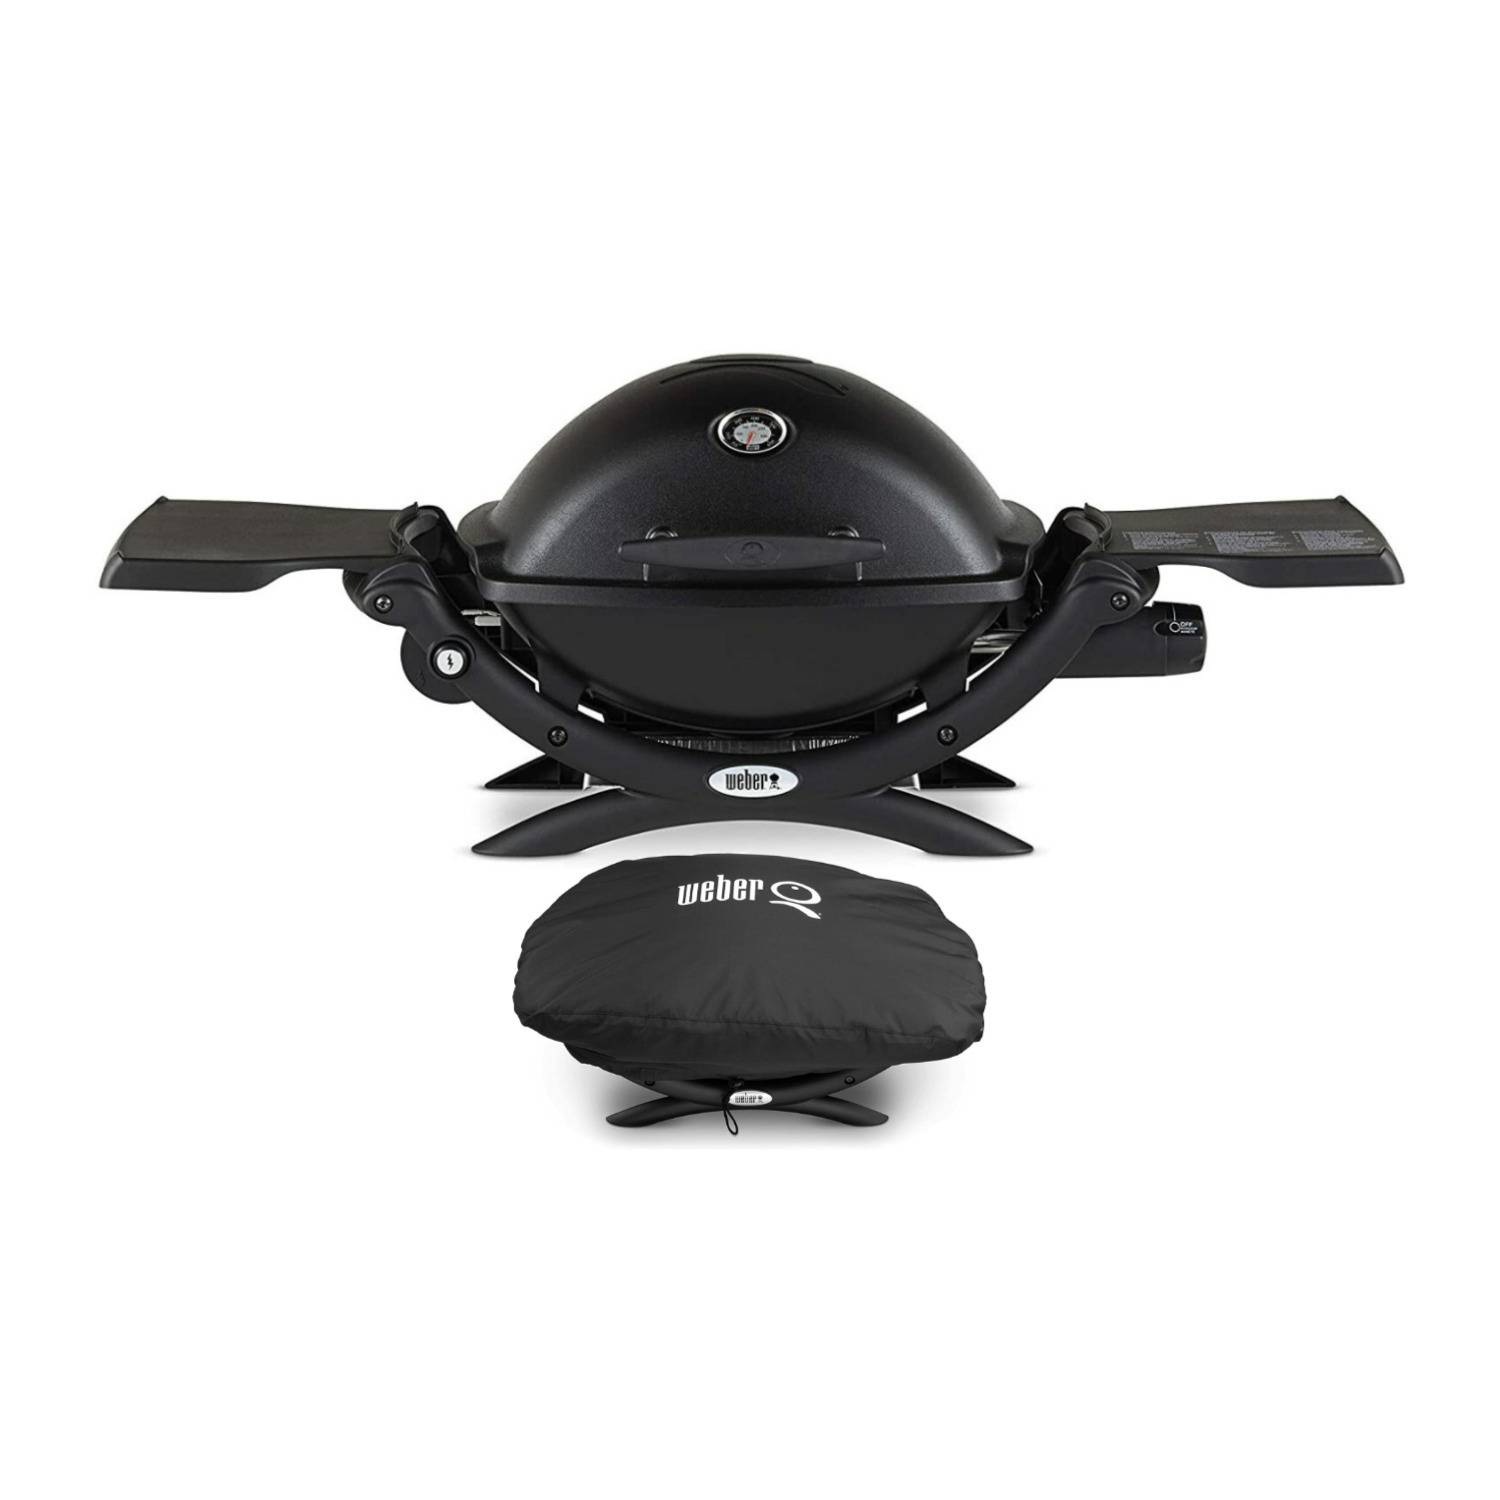 Weber Q 1200 Gas Grill - LP Gas (Black) with Grill Cover